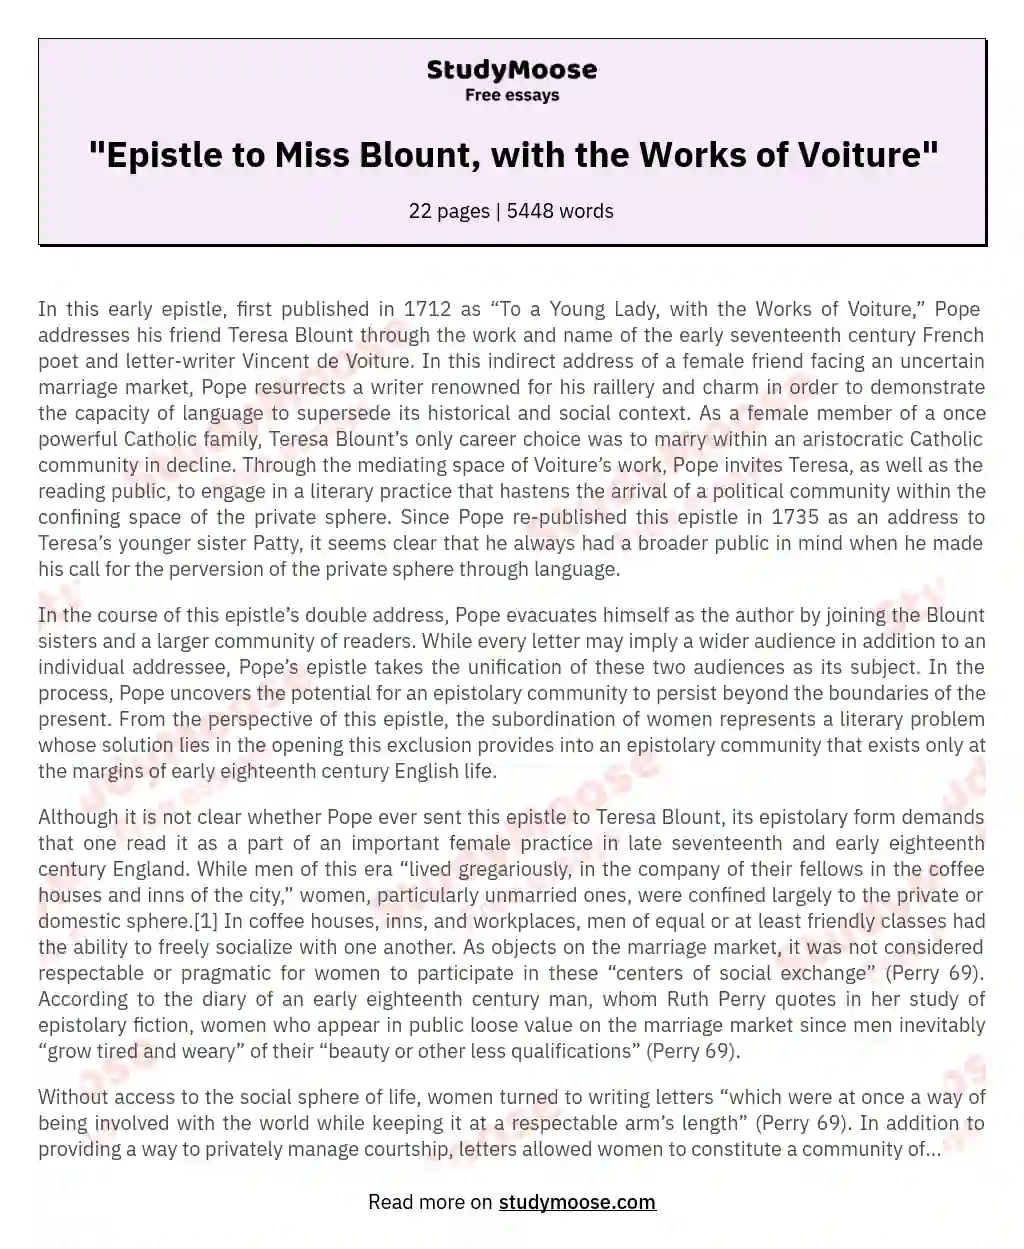 "Epistle to Miss Blount, with the Works of Voiture" essay